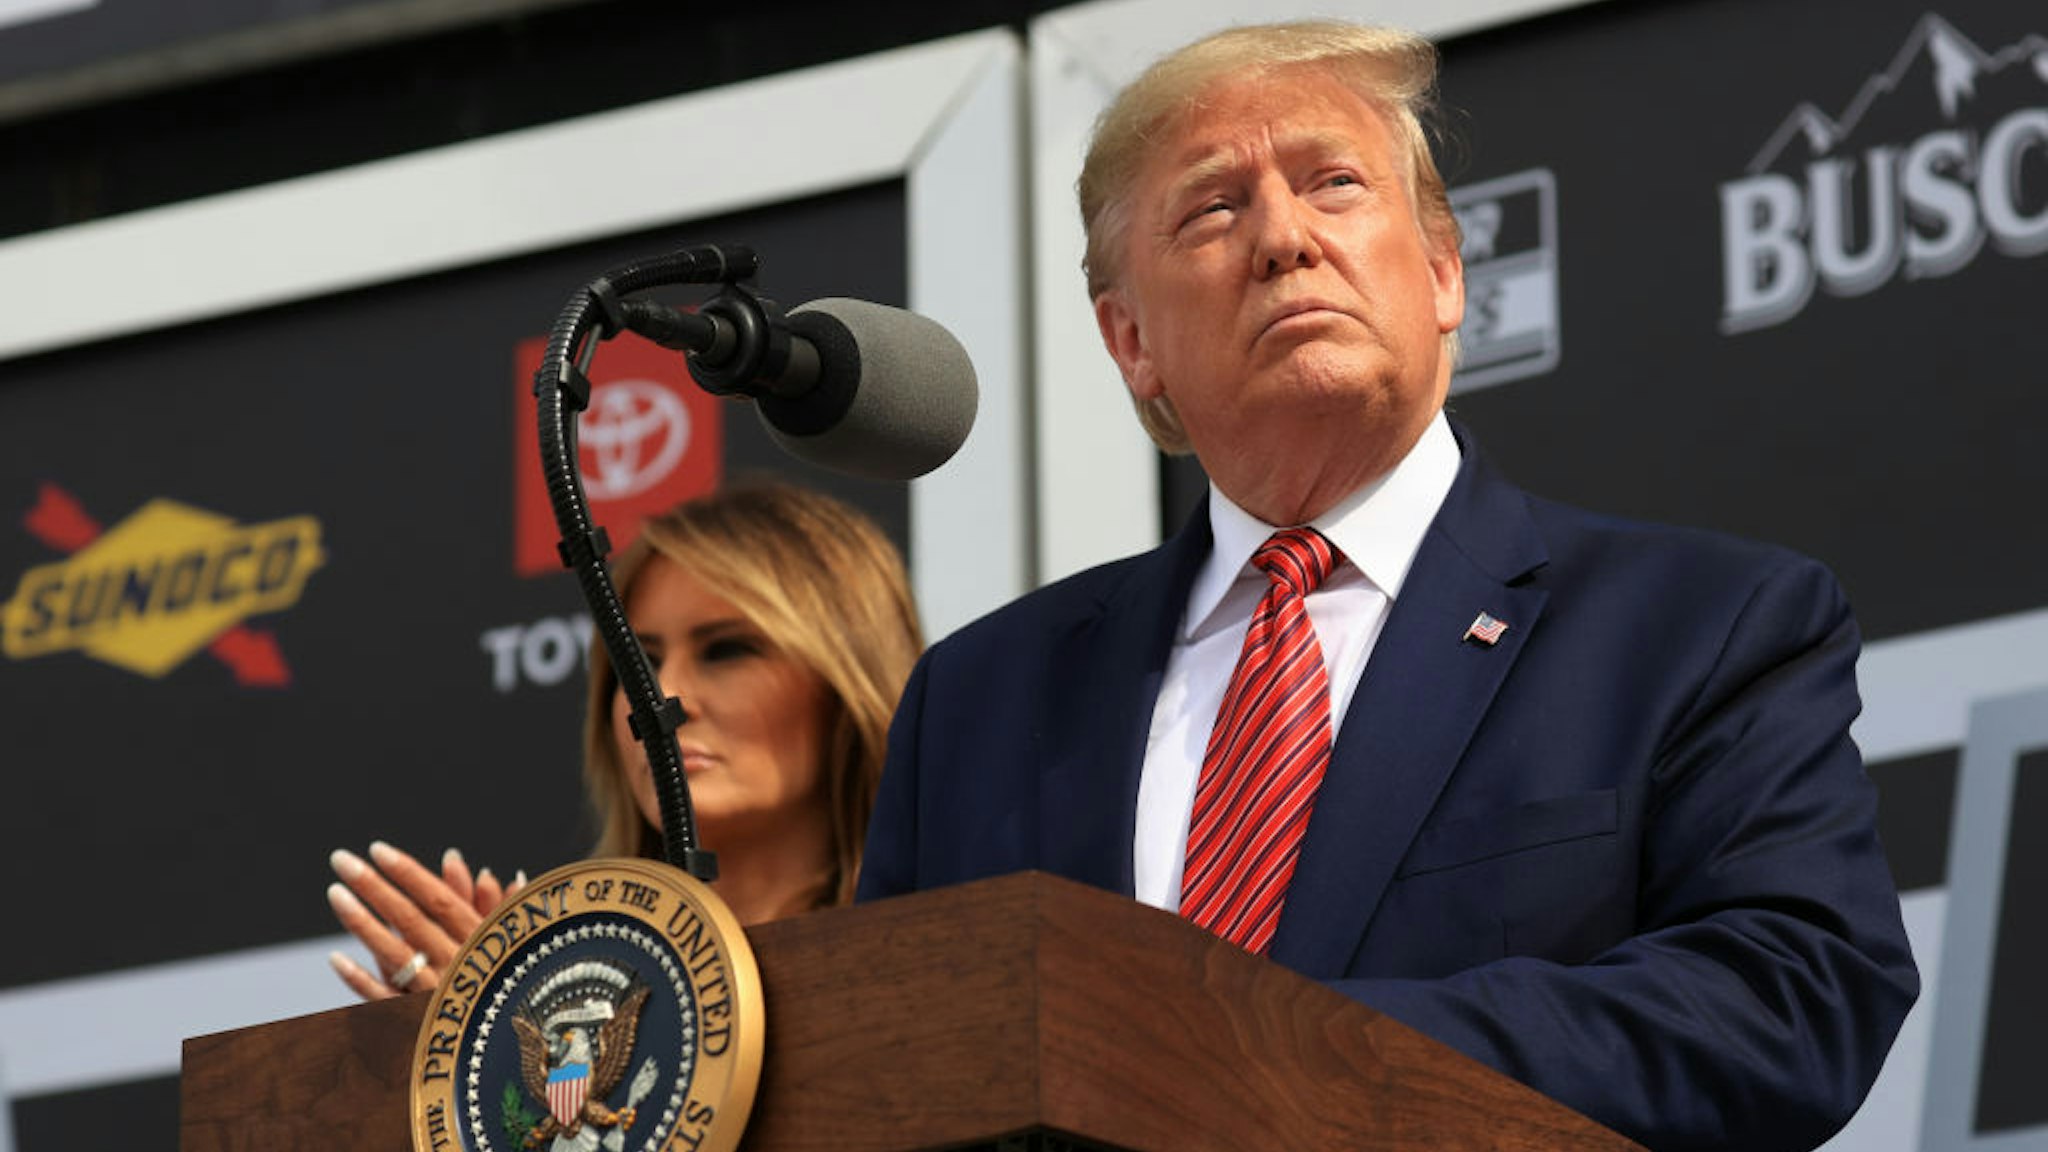 U.S. President Donald Trump speaks as First Lady Melania Trump looks on from Victory Lane prior to the NASCAR Cup Series 62nd Annual Daytona 500 at Daytona International Speedway on February 16, 2020 in Daytona Beach, Florida. (Photo by Chris Graythen/Getty Images)